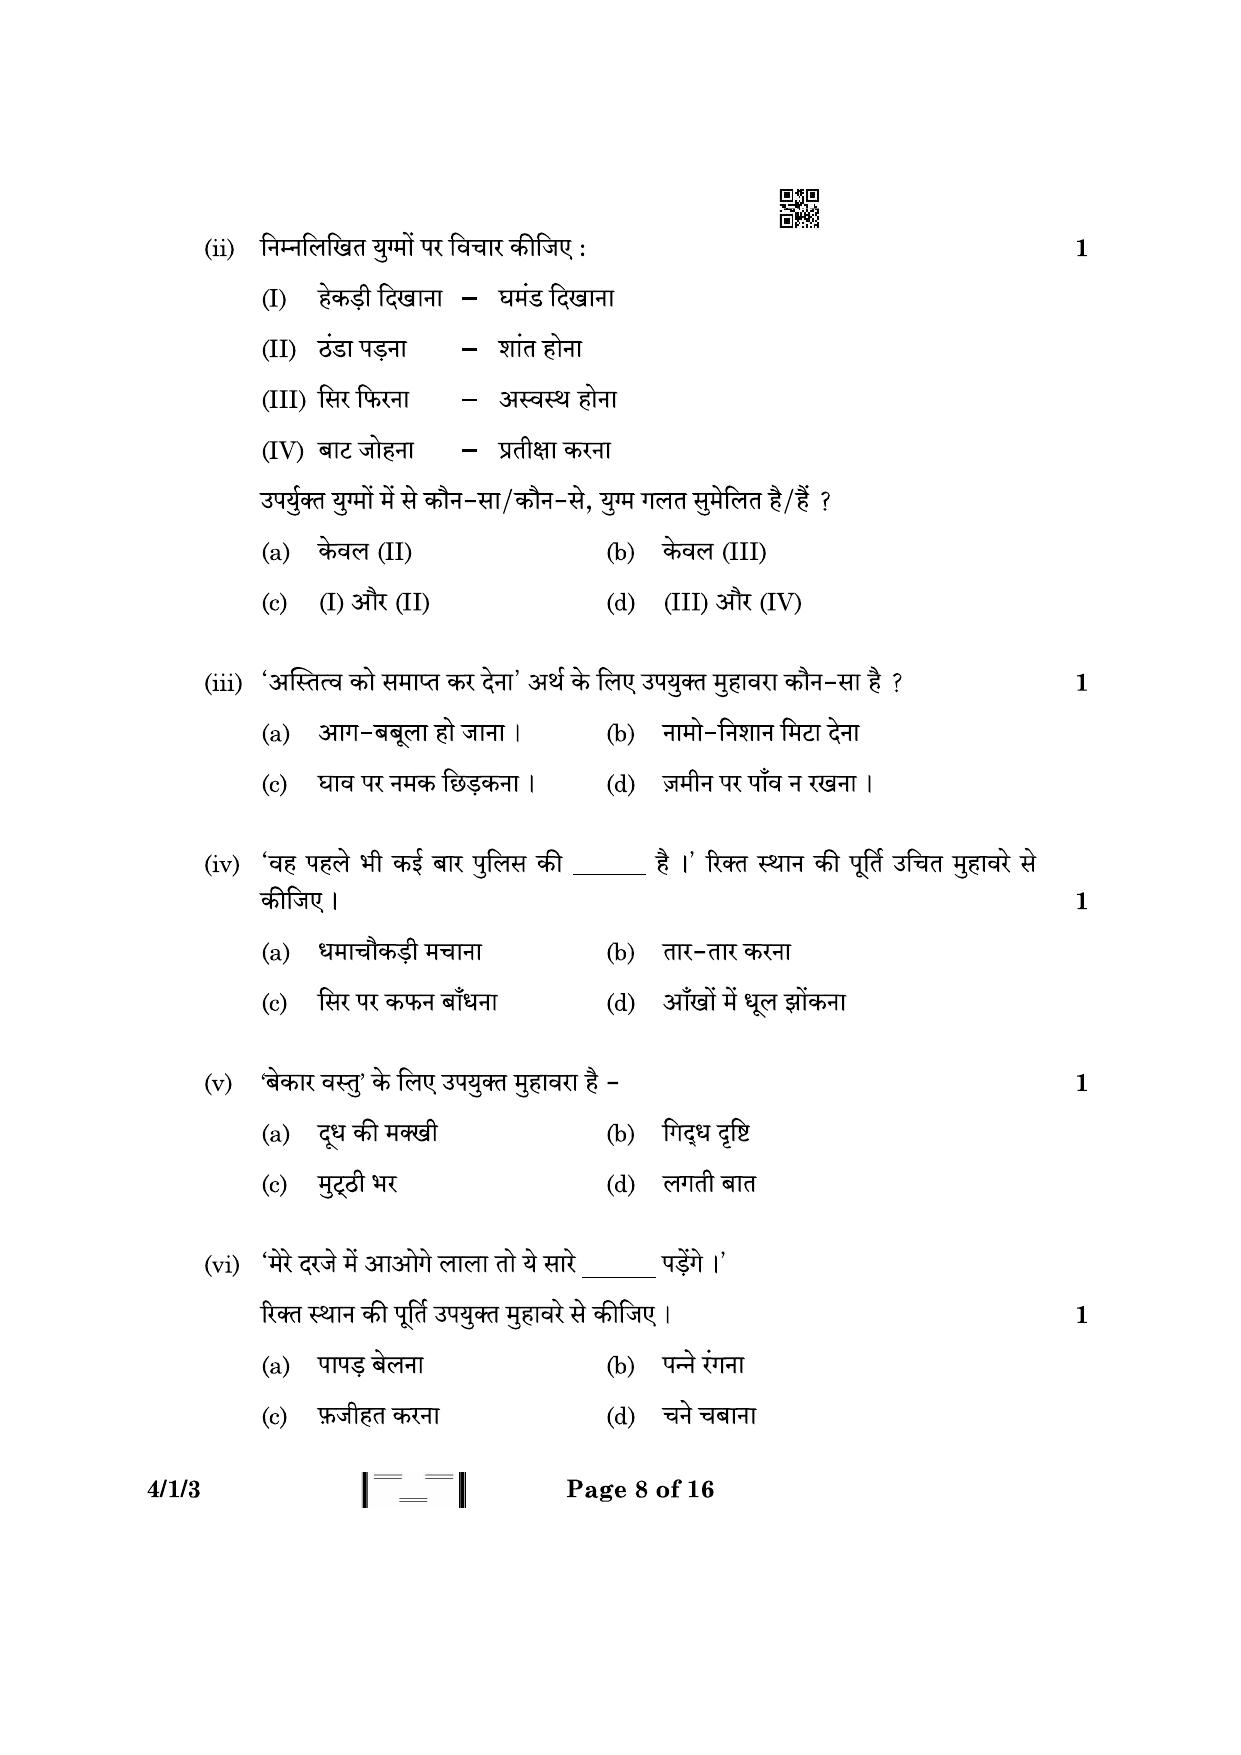 CBSE Class 10 4-1-3 Hindi B 2023 Question Paper - Page 8